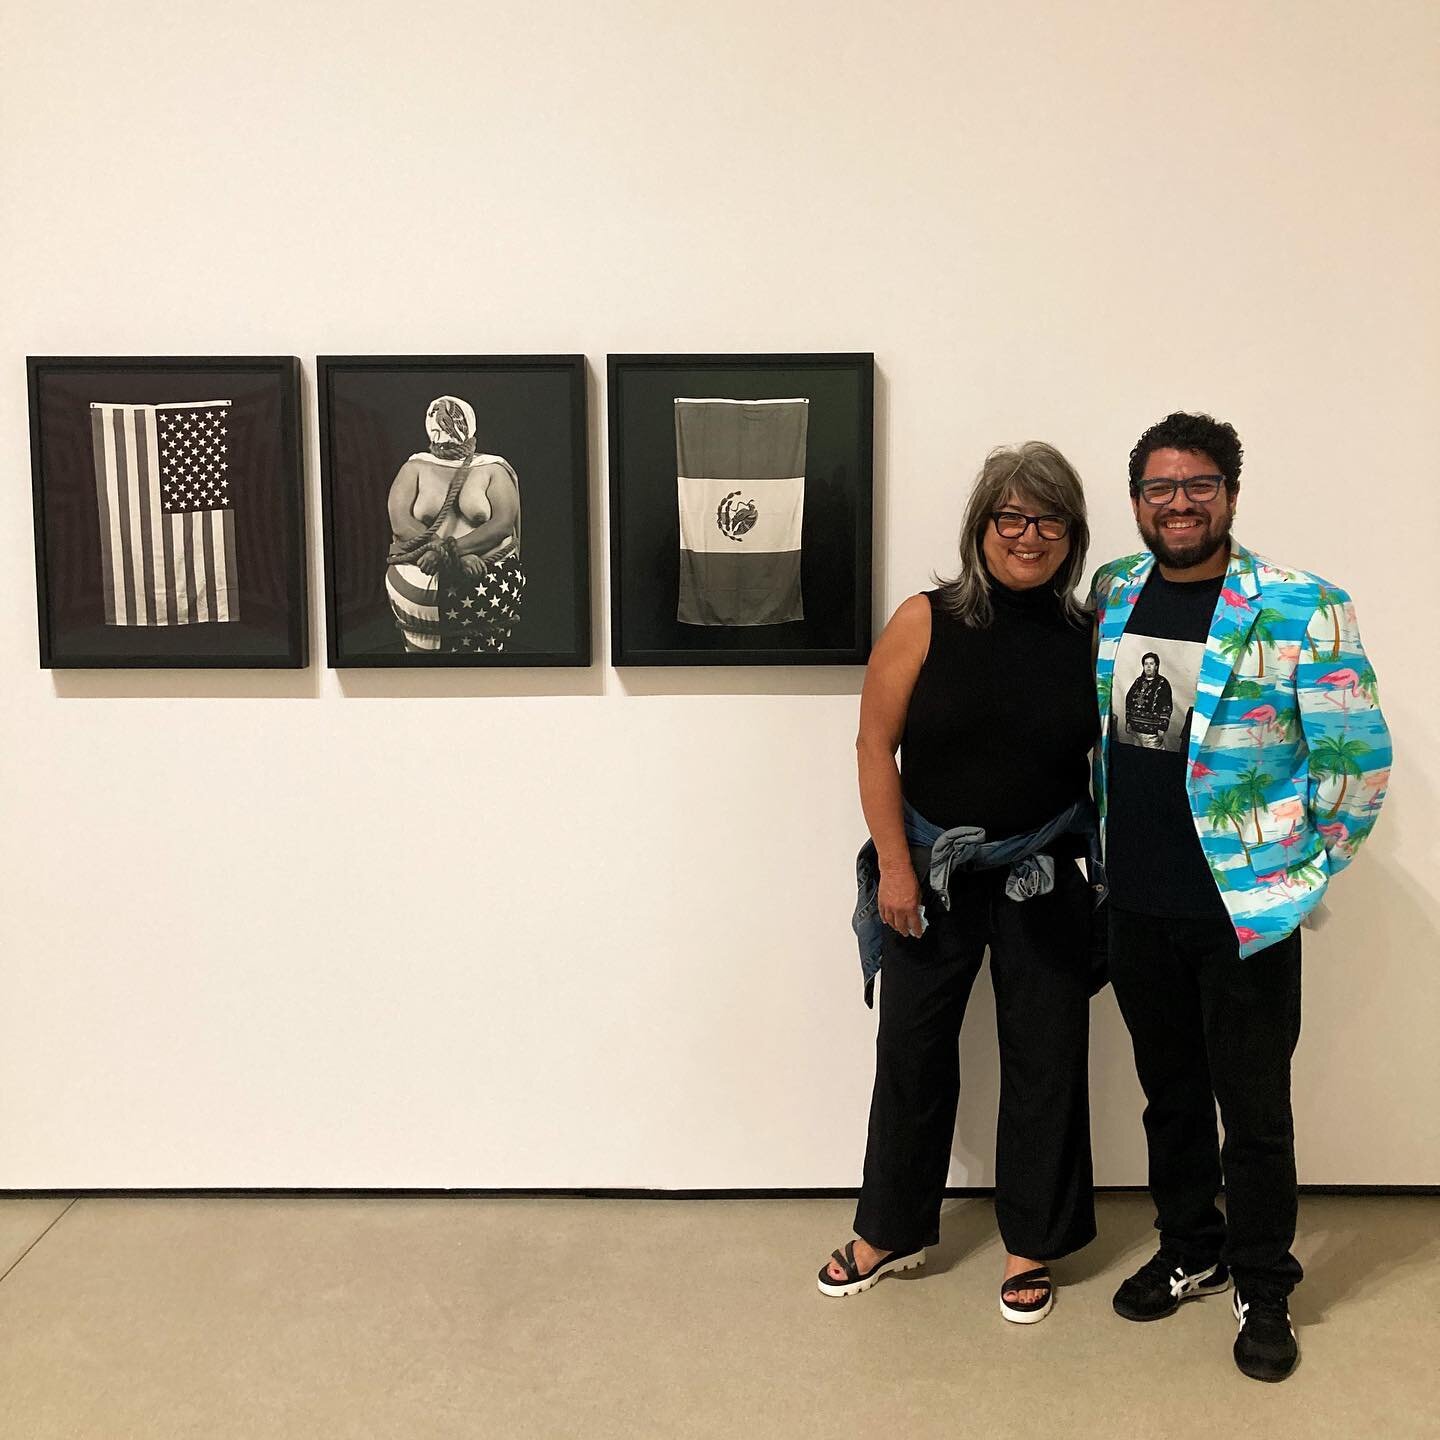 Laura&rsquo;s Three Eagles Flying on loan and apart of The Broad&rsquo;s &ldquo;This is Not America&rsquo;s Flag&rdquo; curated by @sloyer 

Pictured here is myself (Chris) and Sybil Venegas, co-Trustee of Laura&rsquo;s Trust. 

If you are in Los Ang